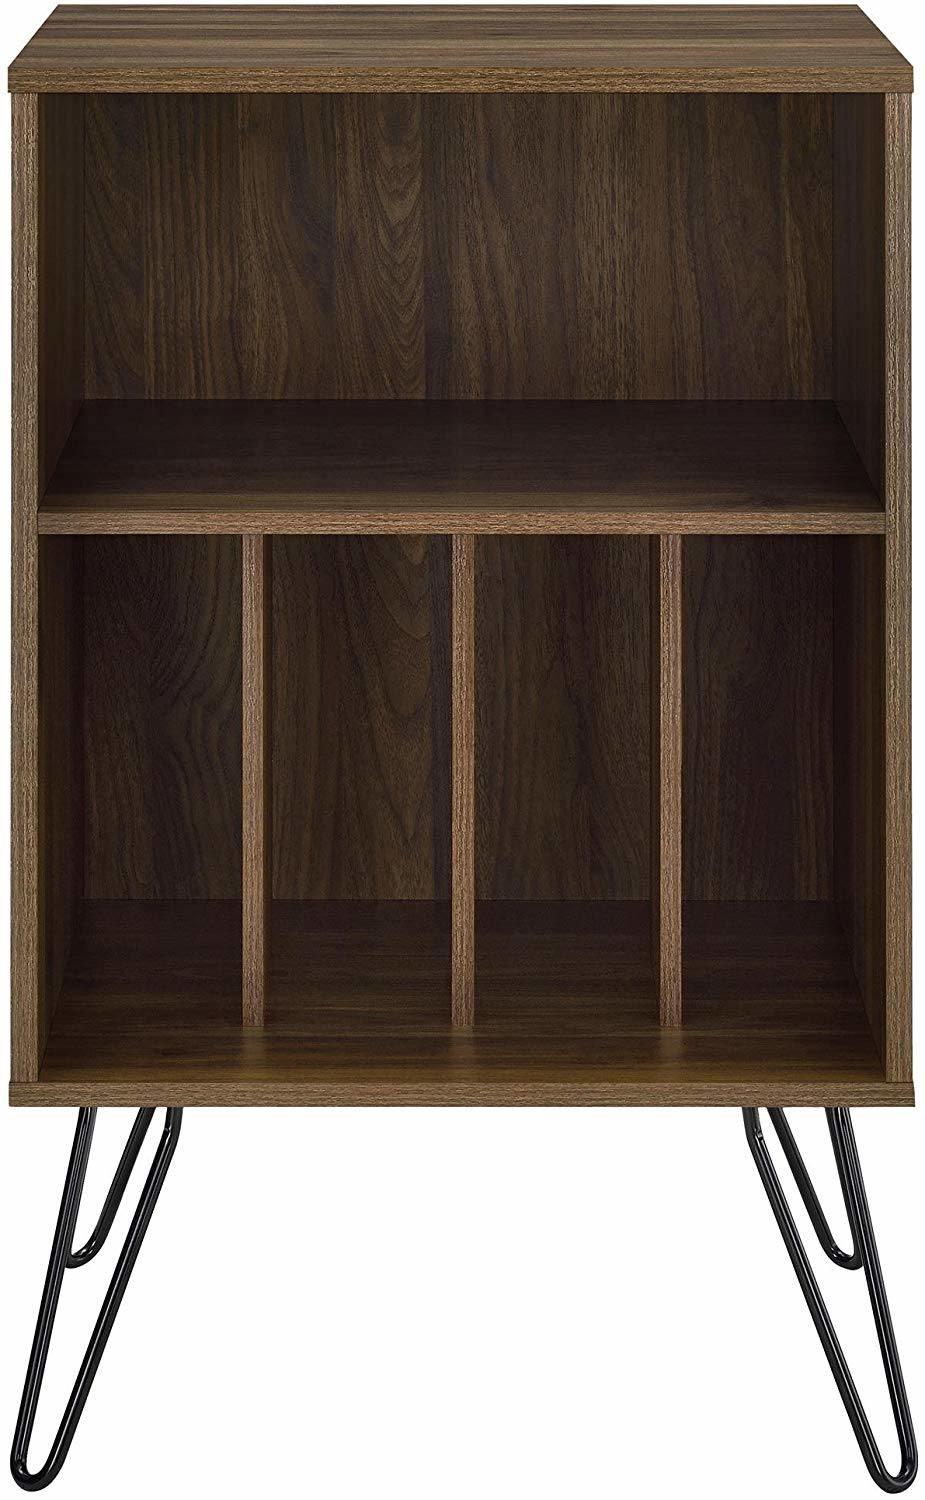 Dark Oak Coffee Side Tables for Small Spaces with Storage